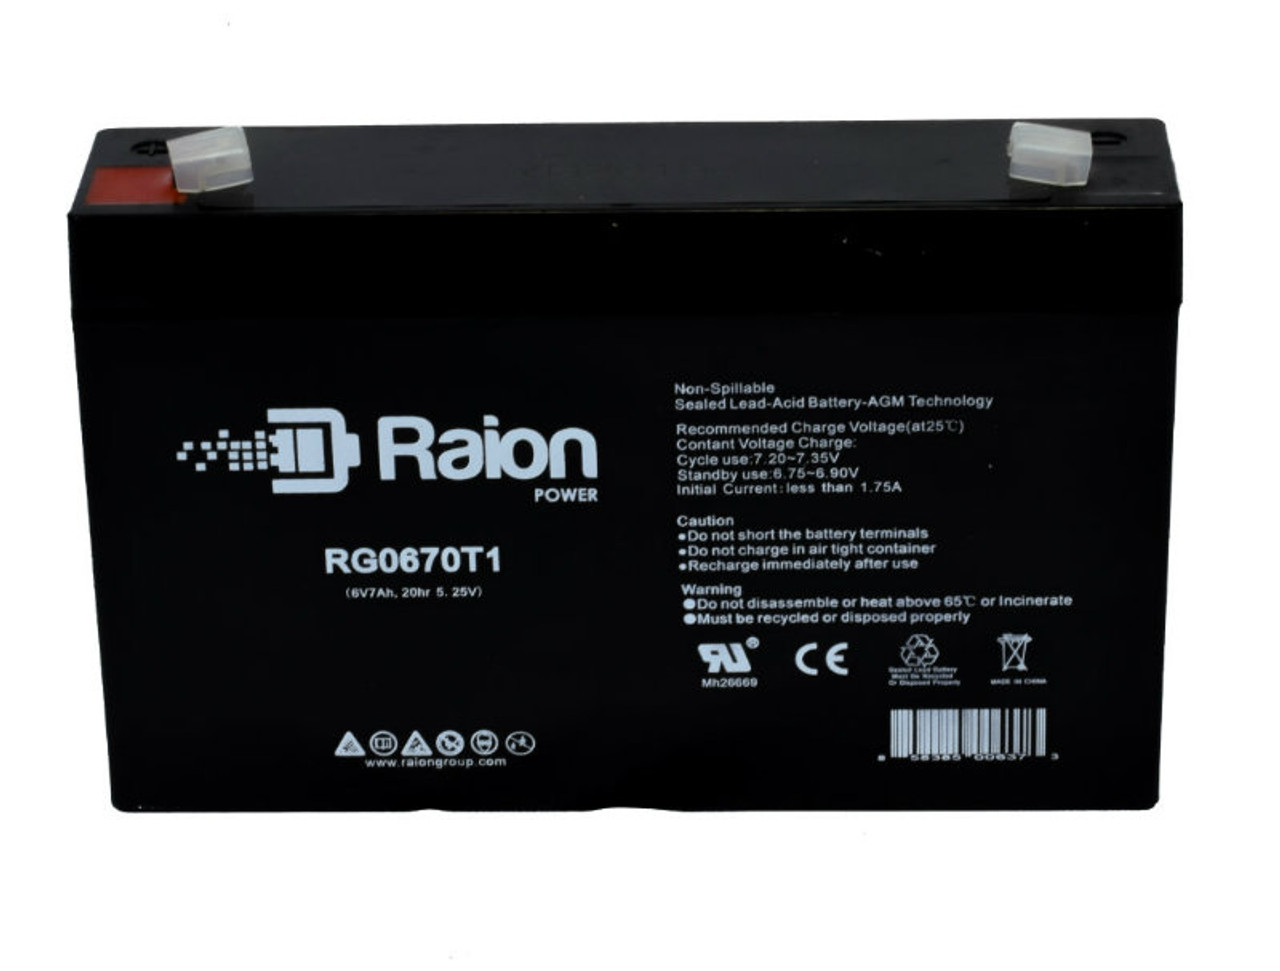 Raion Power RG0670T1 Replacement Battery Cartridge for Dual-Lite LM80